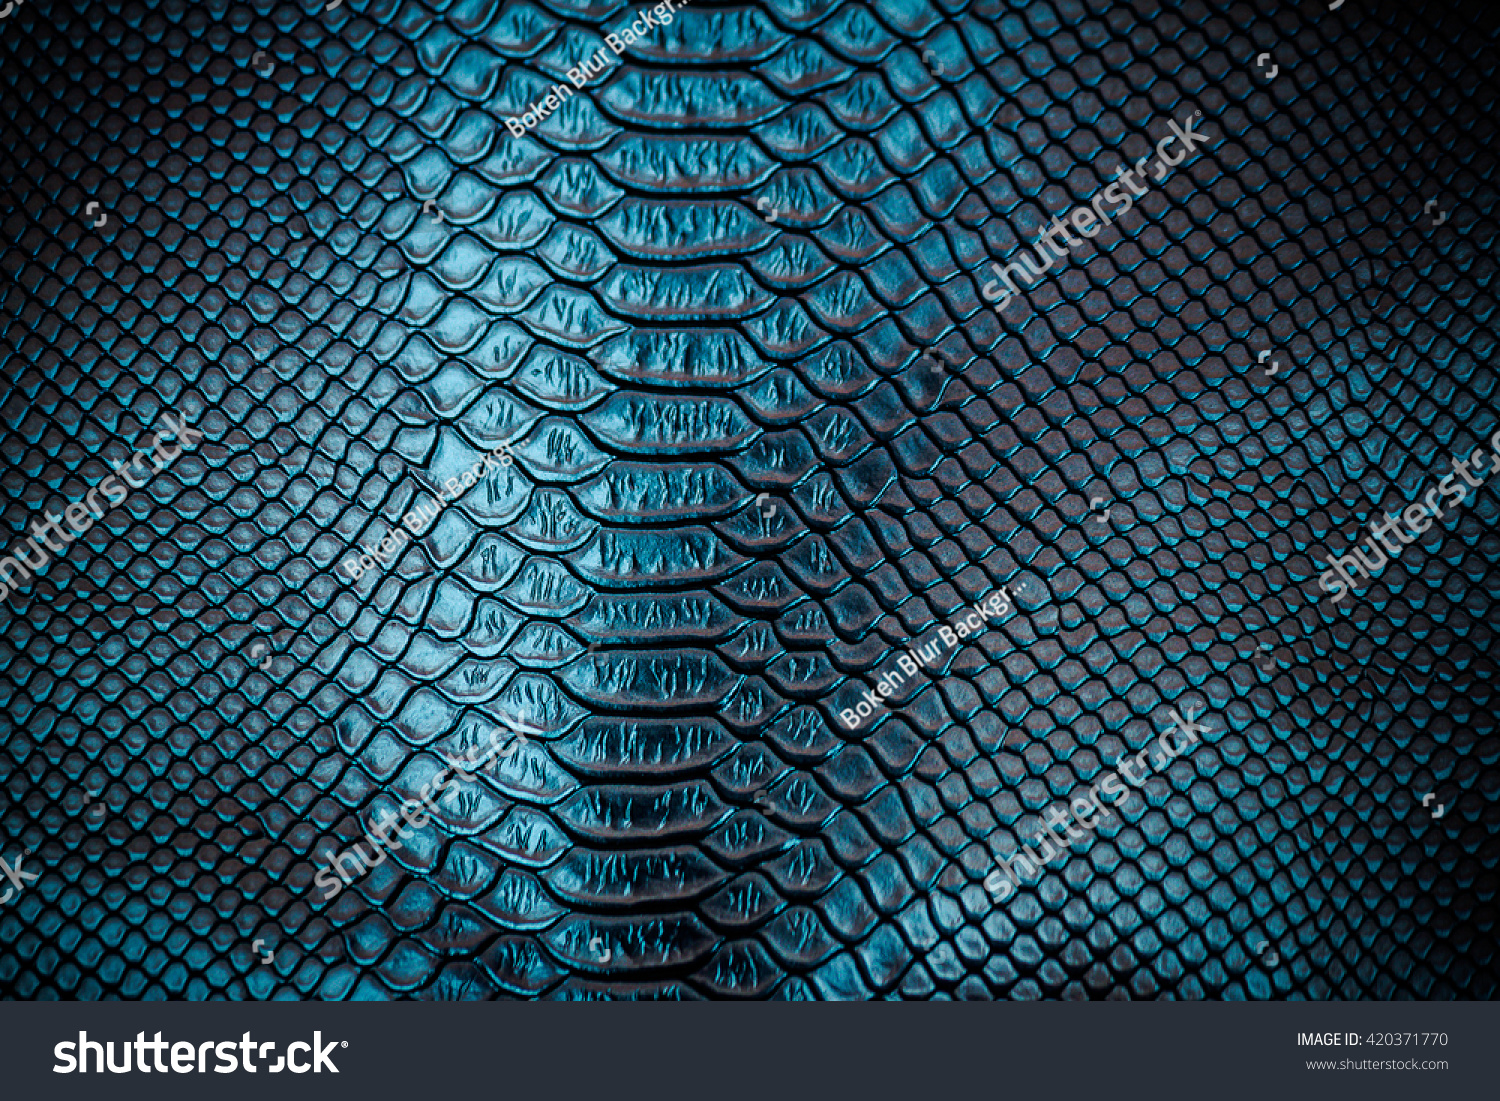 71,050 Blue skin texture Stock Photos, Images & Photography | Shutterstock